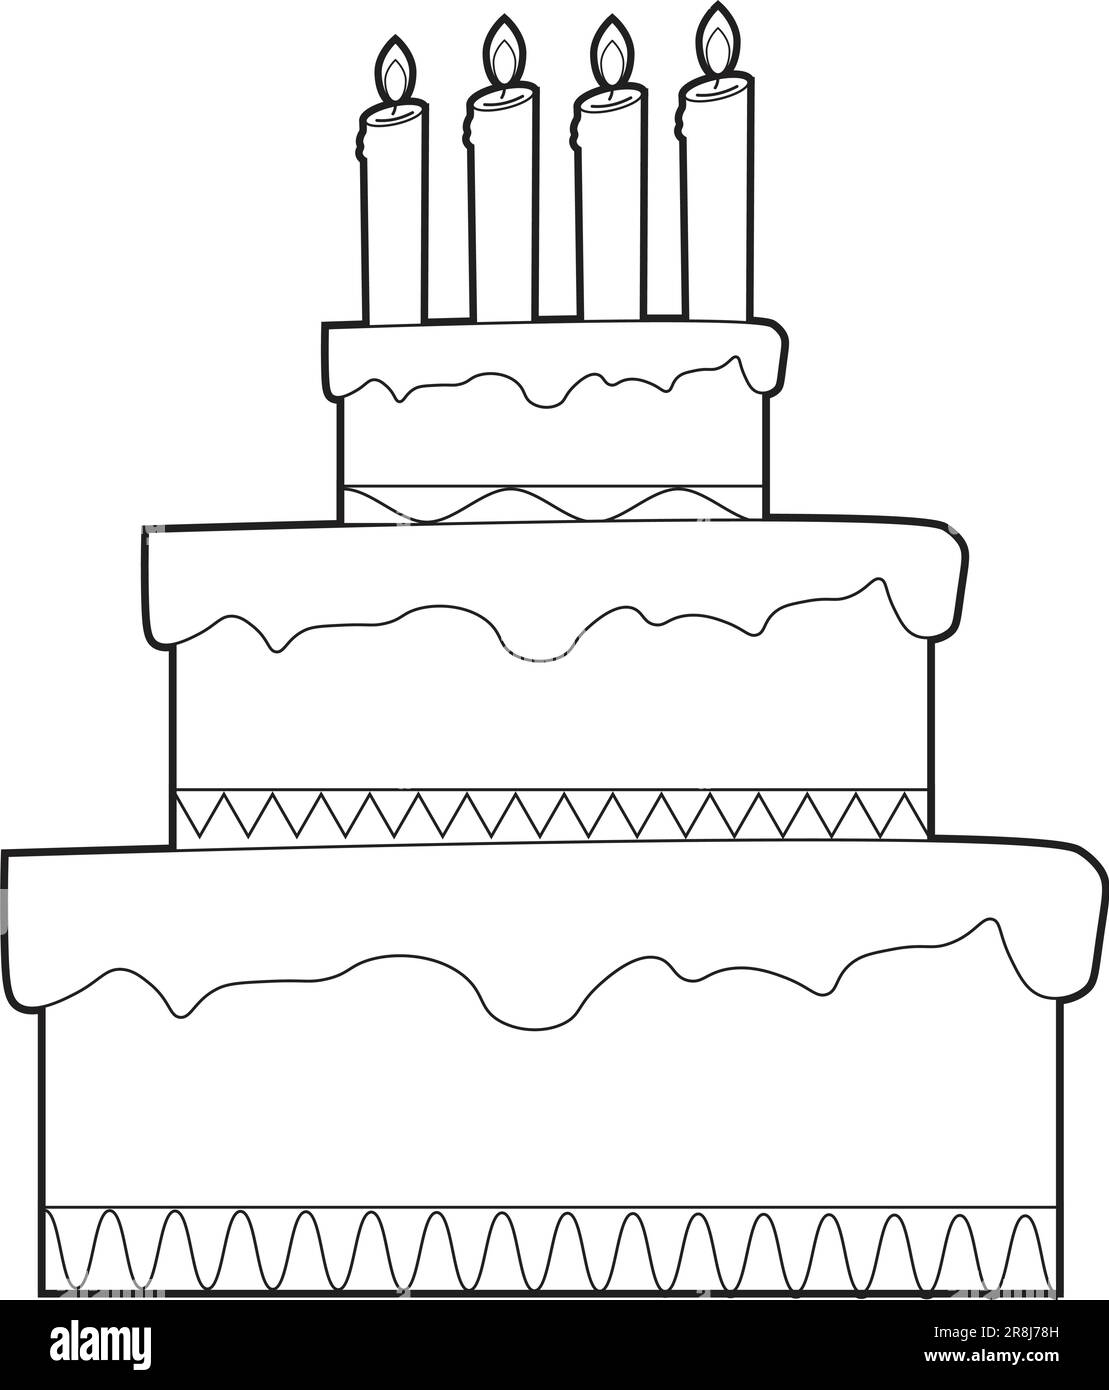 Coloring page of a tiered Birthday cake with candles. Illustration for coloring page for kids Stock Vector